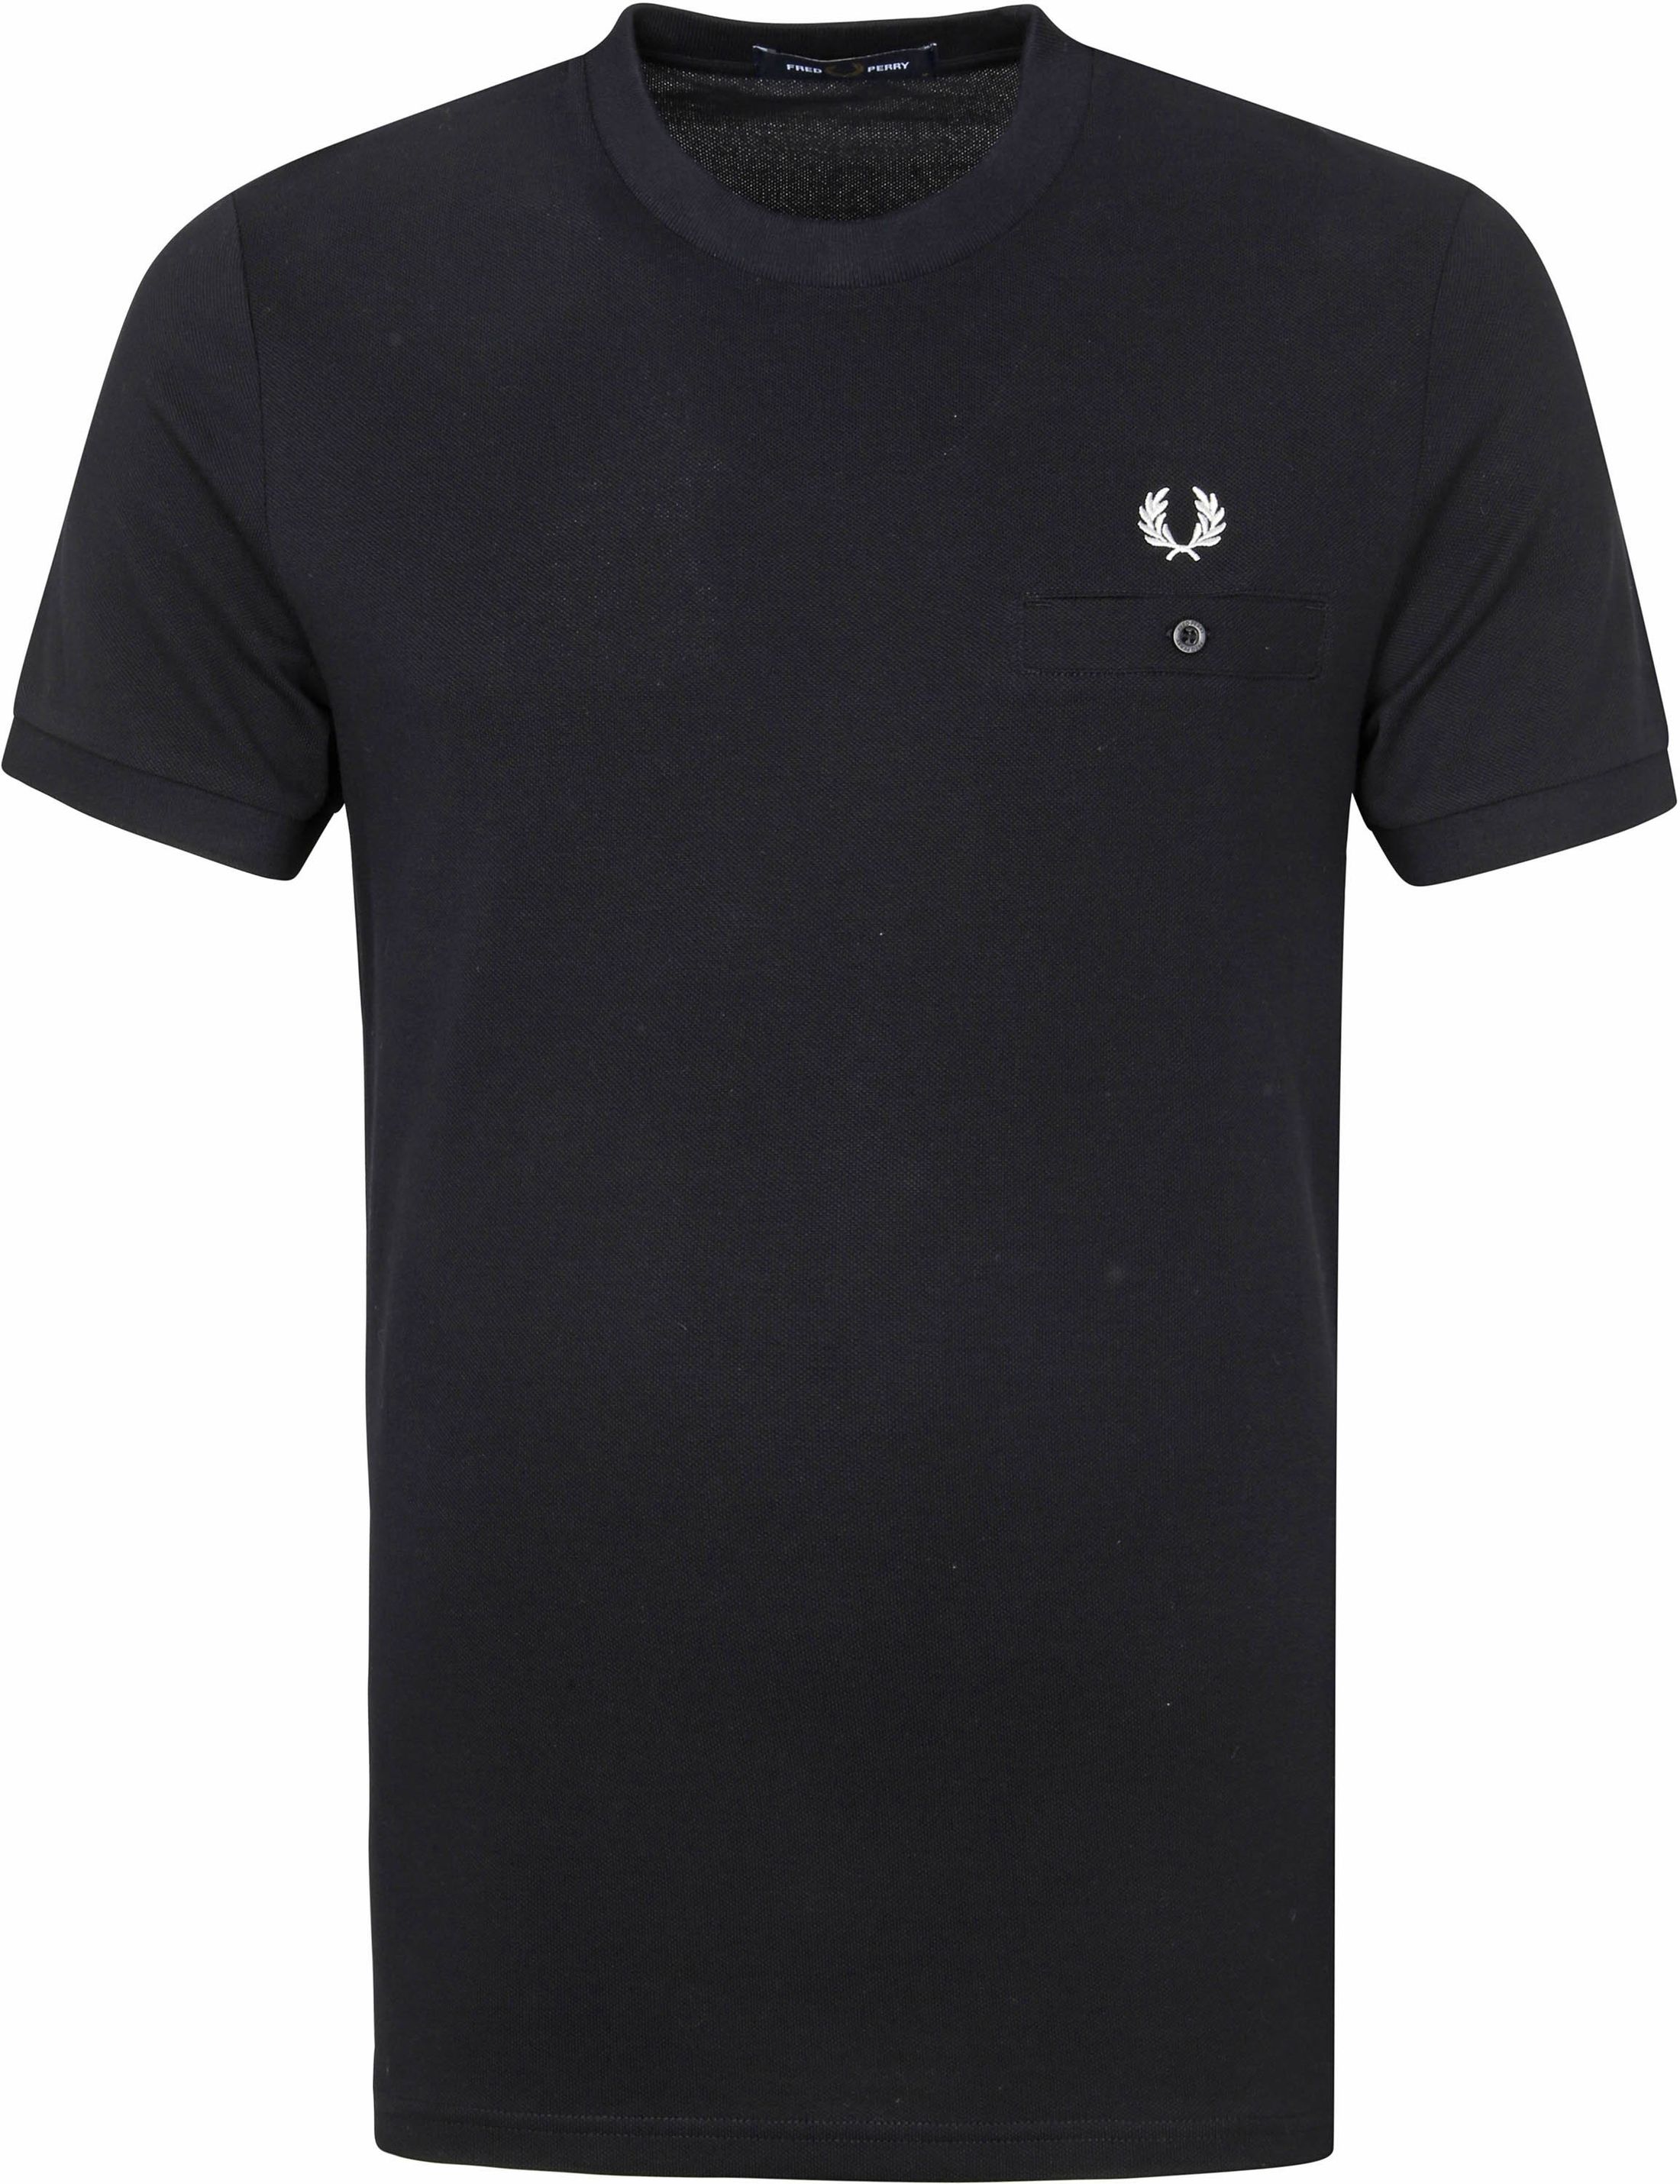 Fred Perry T-Shirt M8531 Black size M